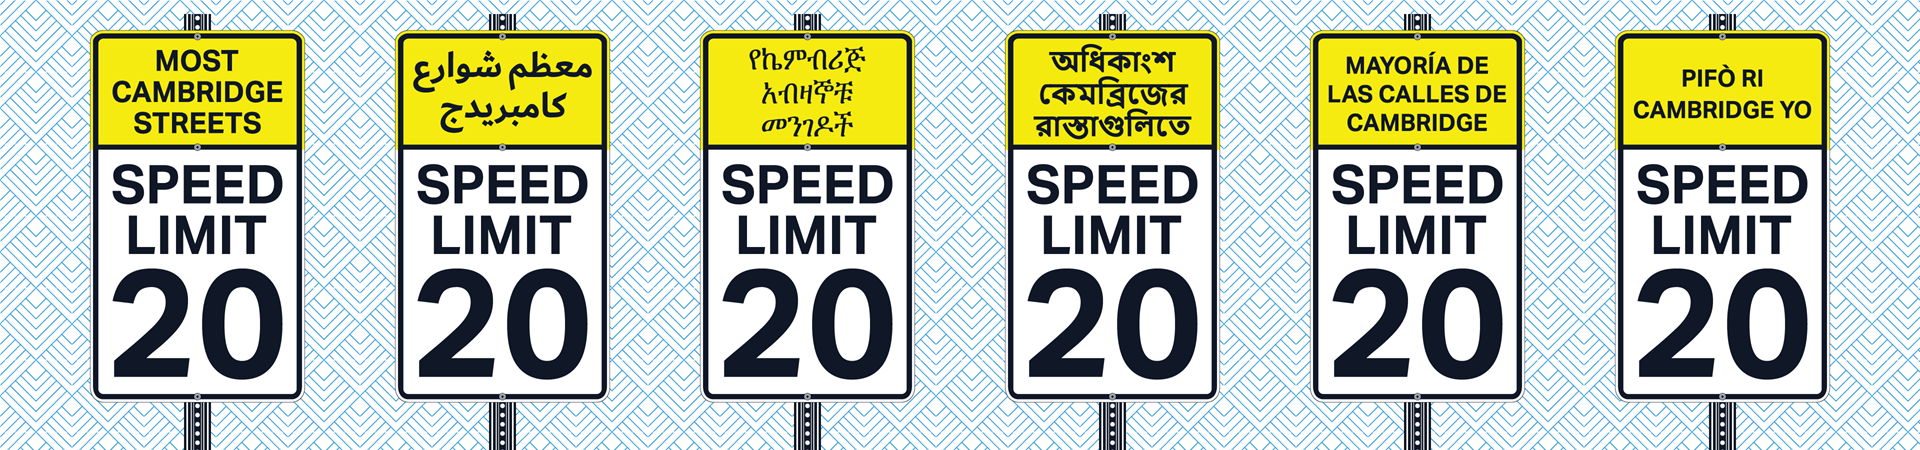 Signs that say "On most Cambridge Streets, speed limit 20" in multiple languages.